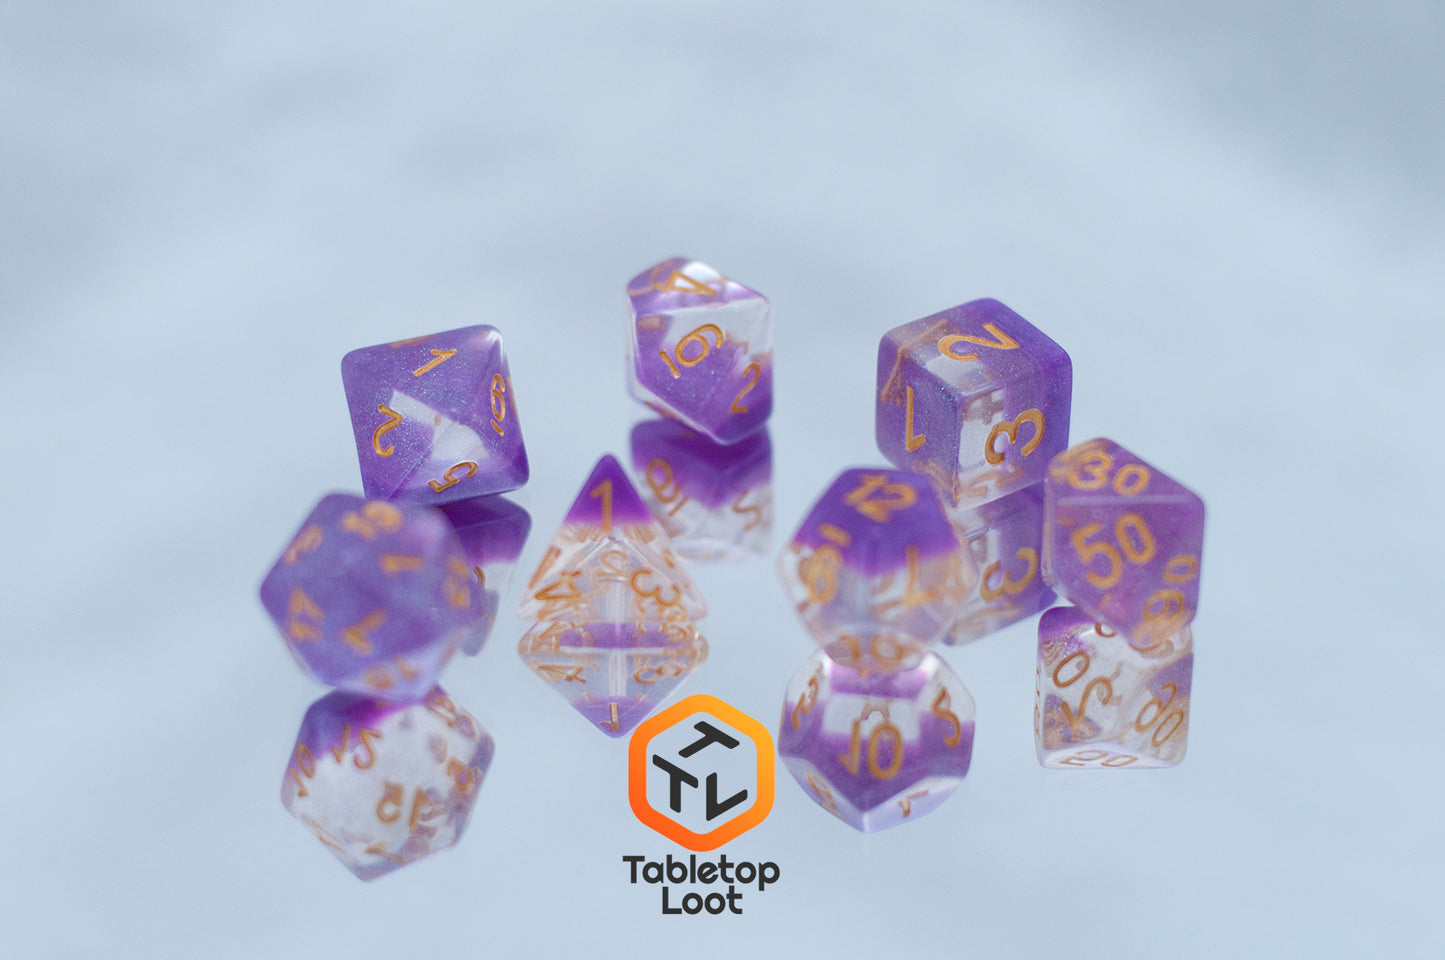 The Gravitational Force 7 piece dice set from Tabletop Loot with a layer of light purple and clear glittery resin.